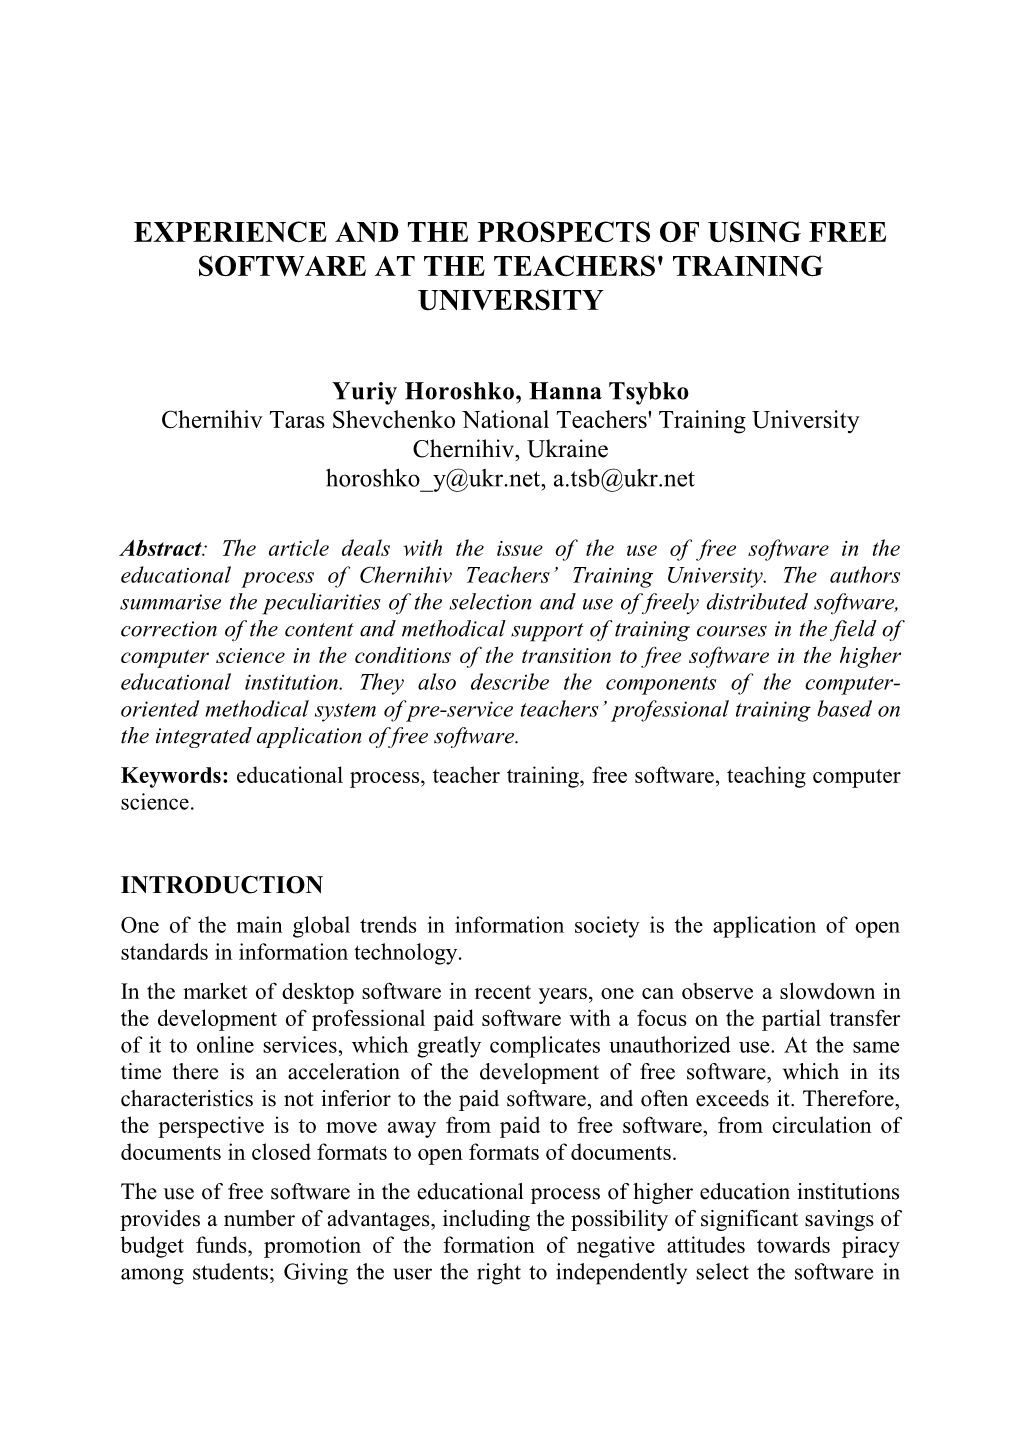 Experience and the Prospects of Using Free Software at the Teachers' Training University